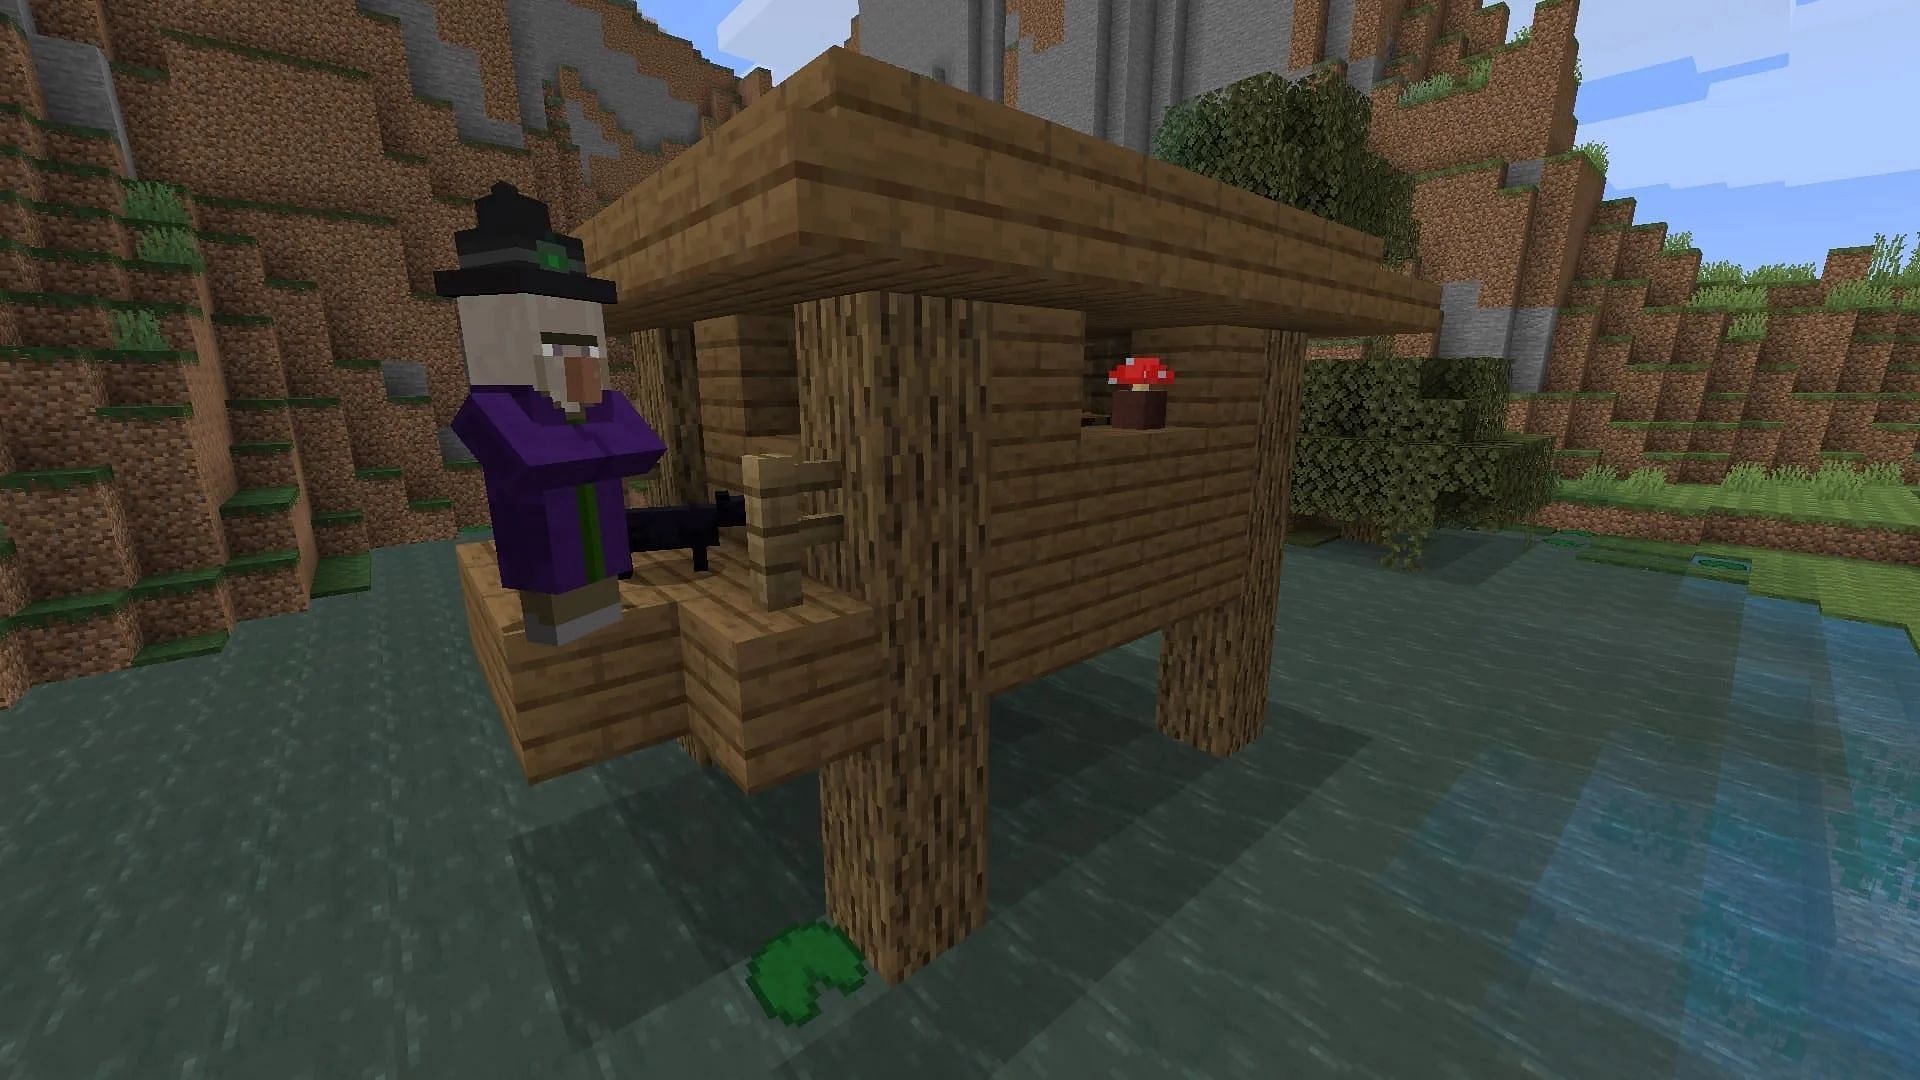 A witch in a hut (Image via Minecraft)